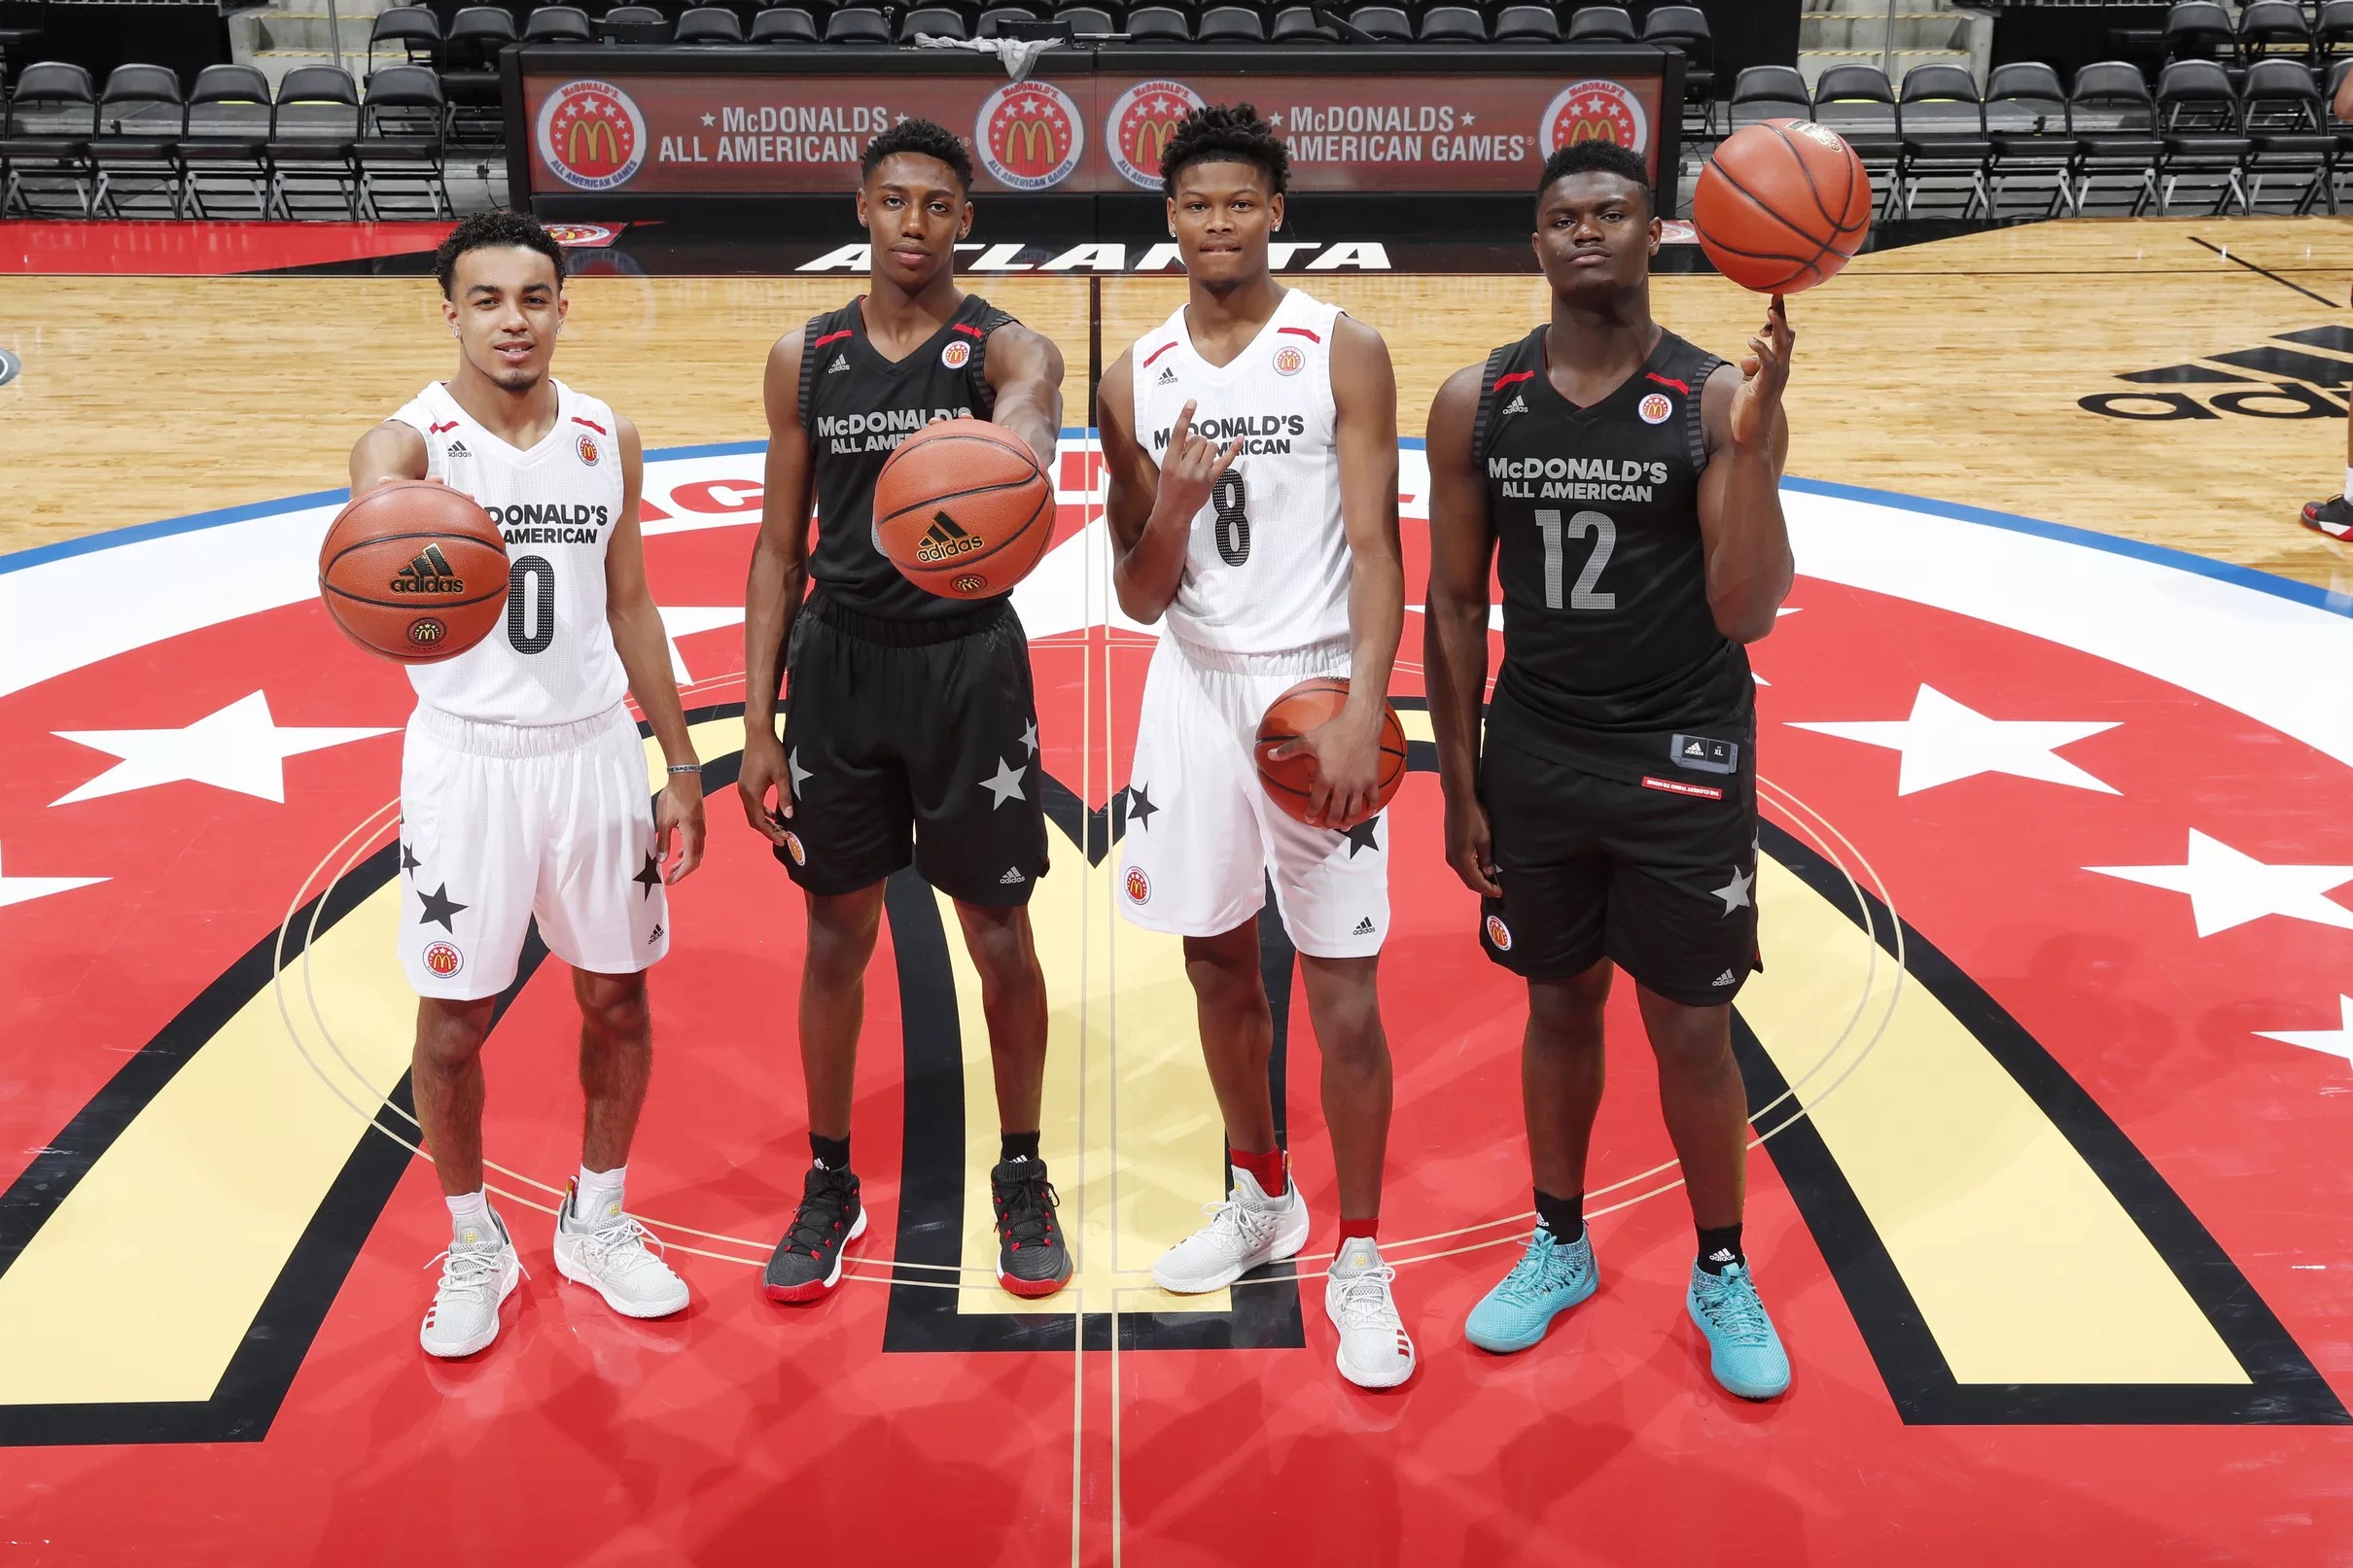 A look at what players wore for the McDonald’s All American game.